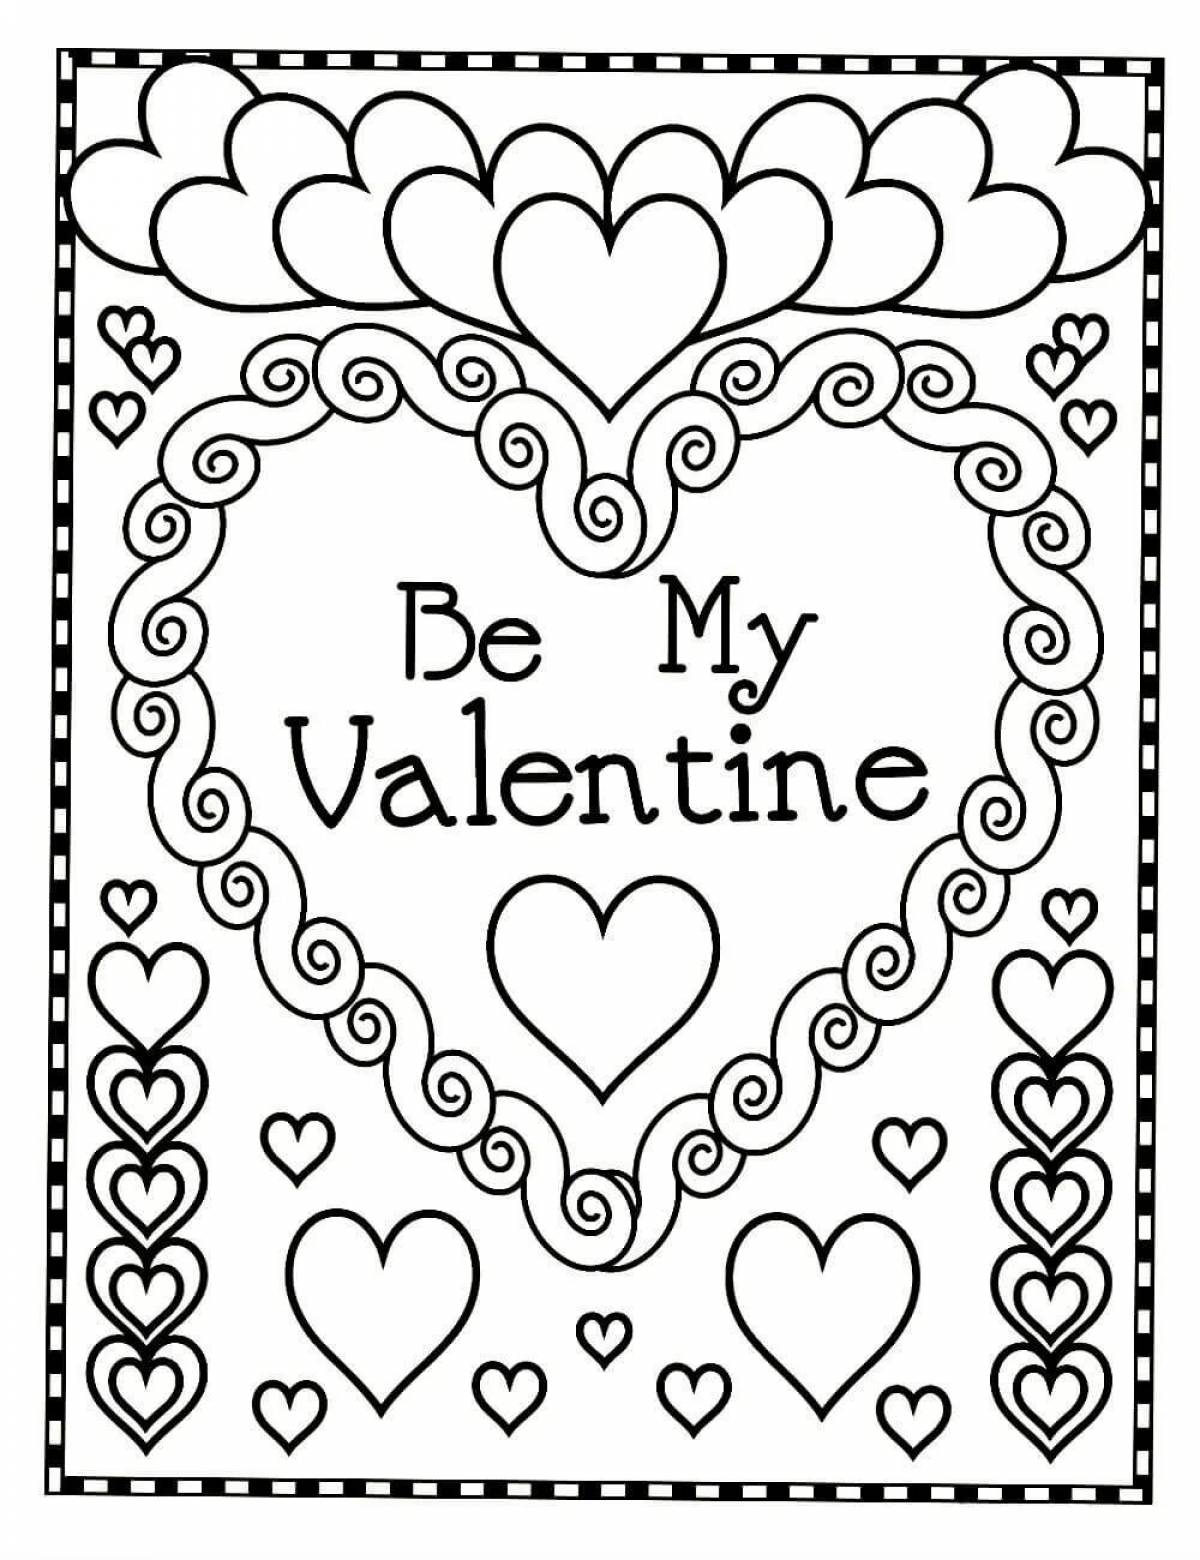 Mystical card heart coloring page